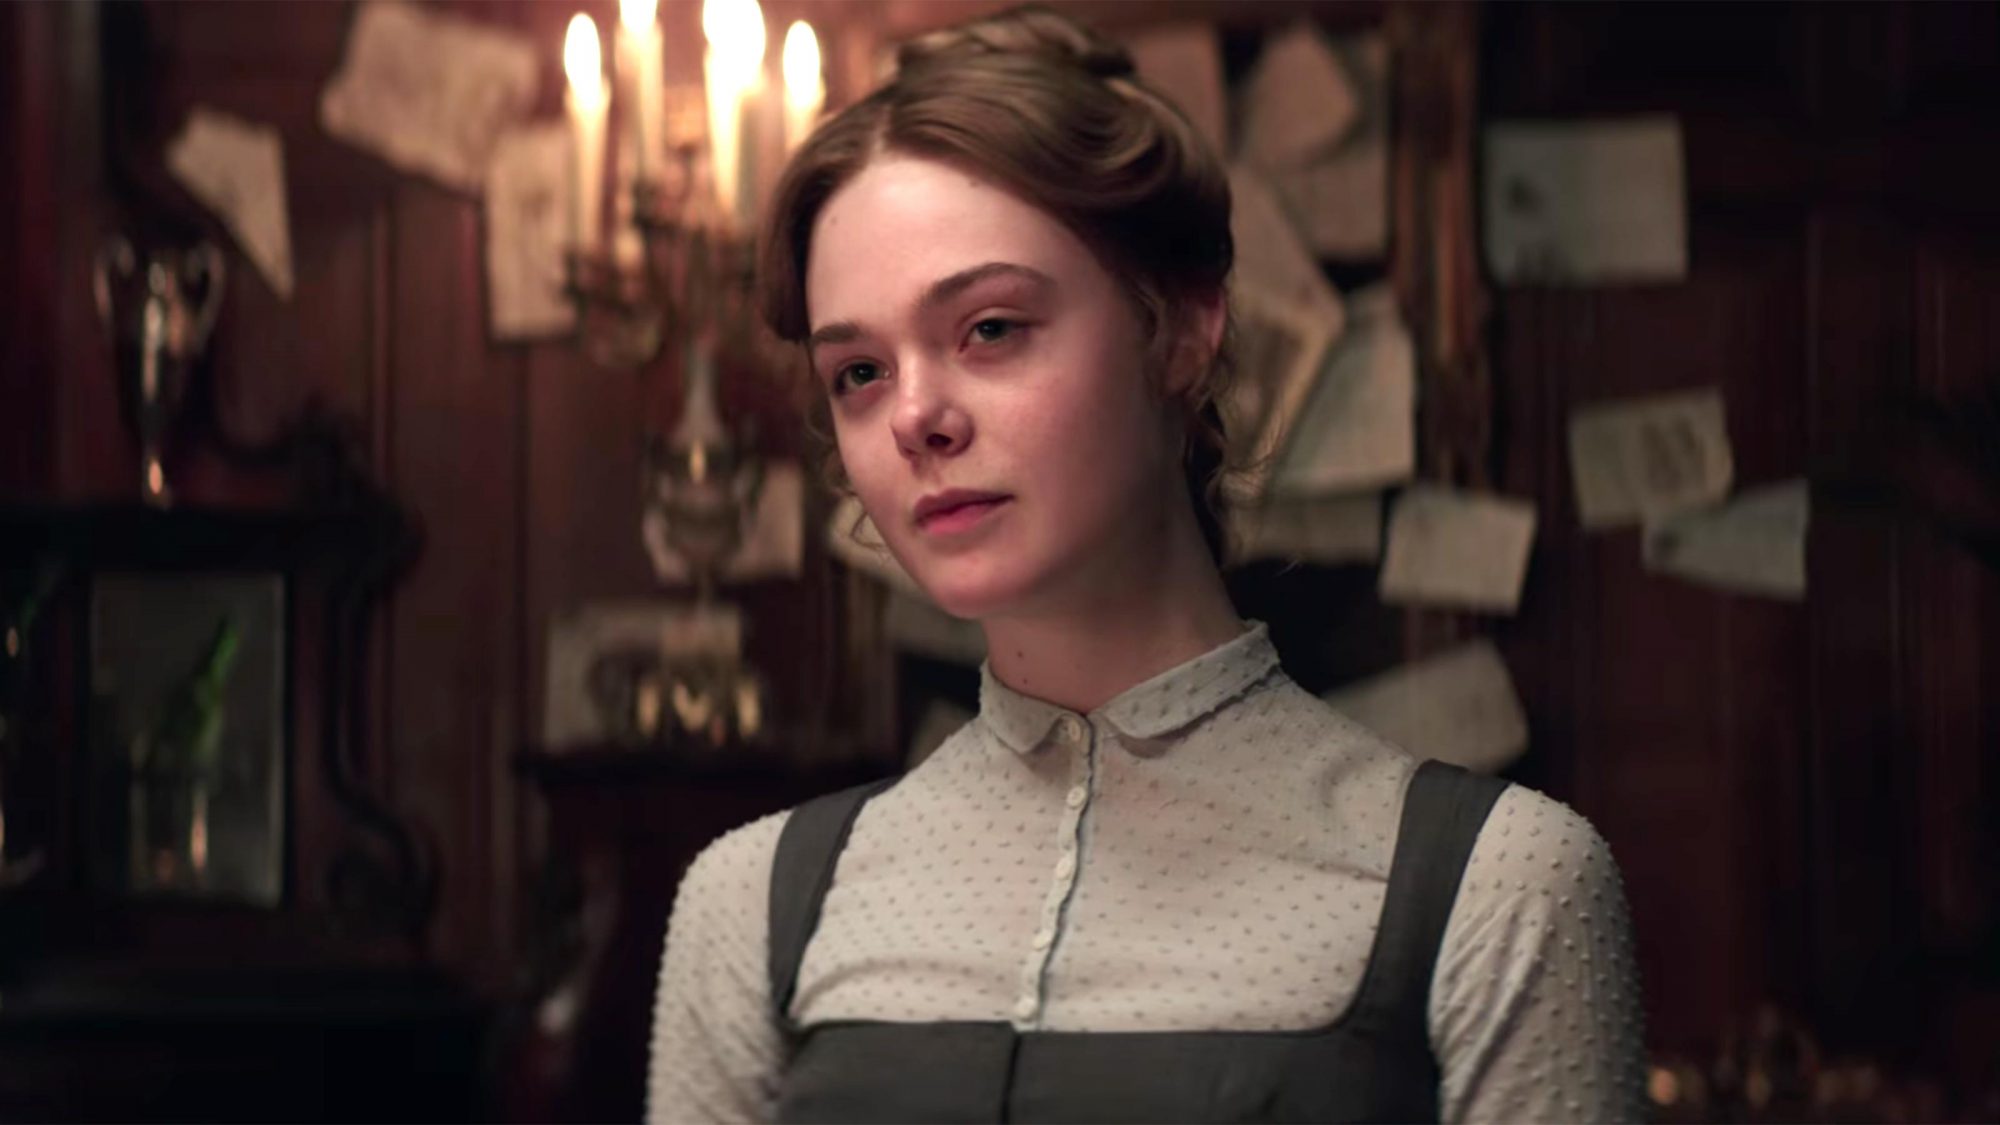 Elle Fanning Mary Shelley 2018 Movie Wallpapers